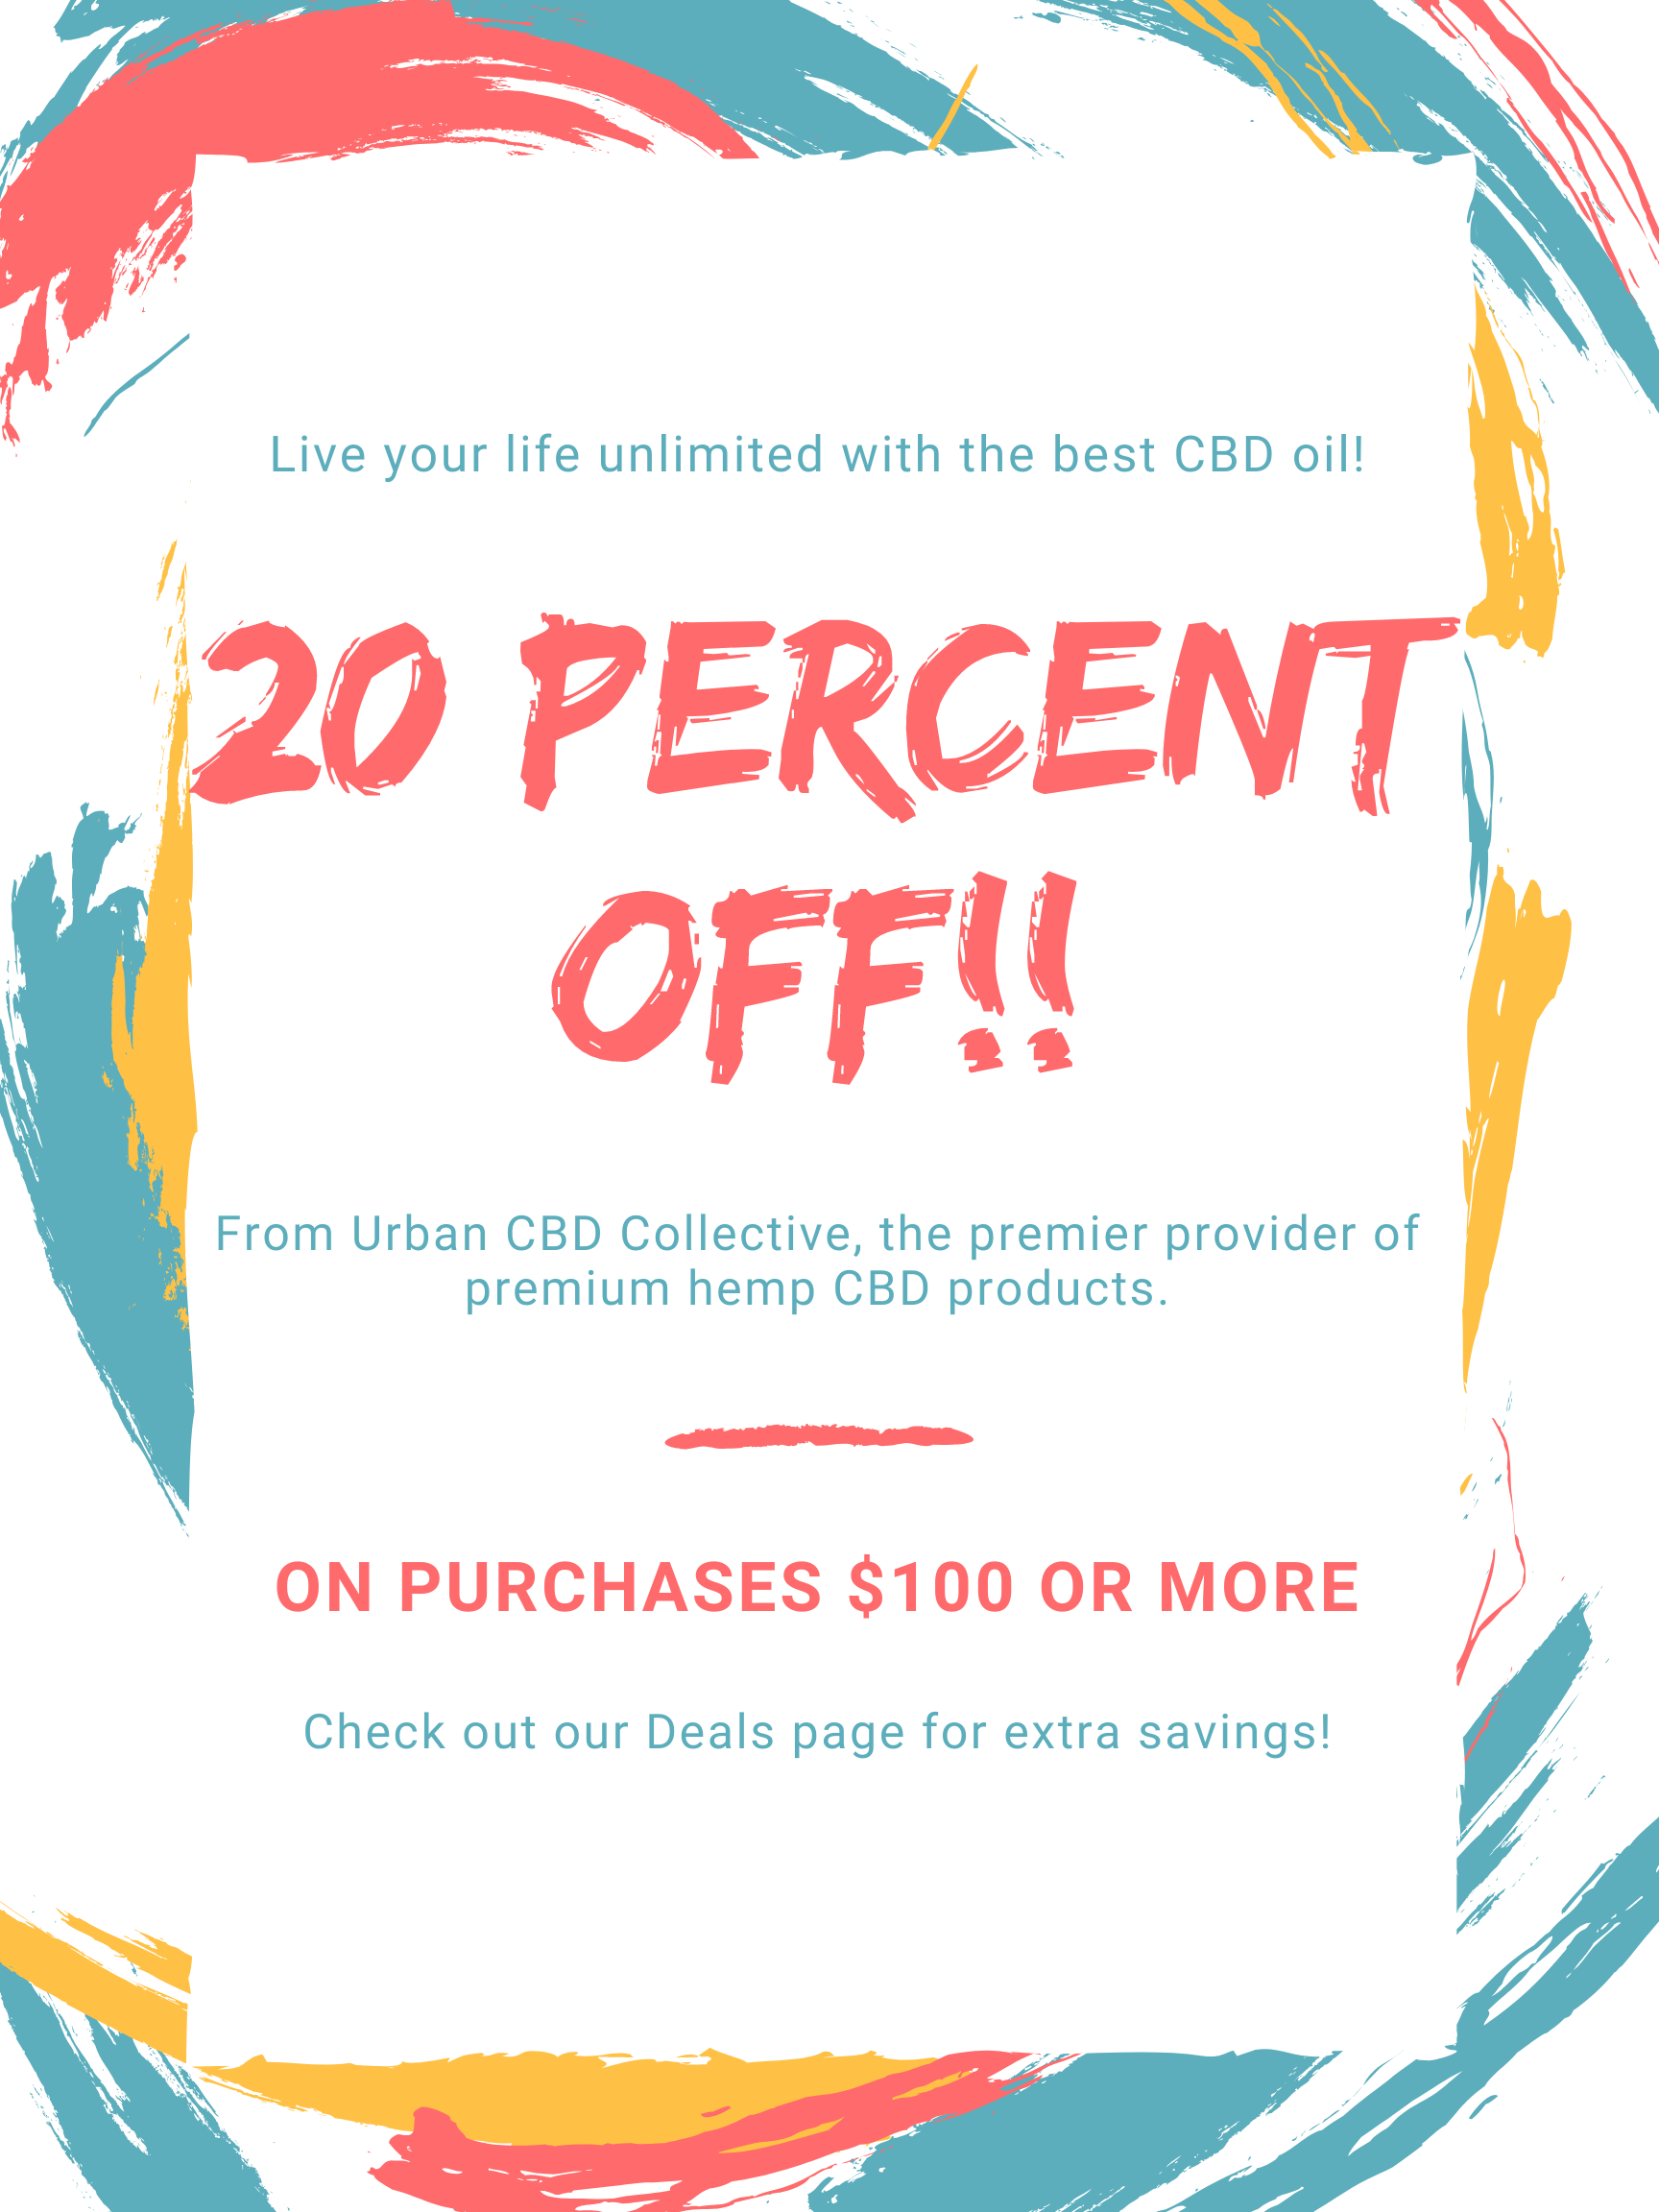 Take 20% off on orders $100 or more at Urban CBD Collective - 404-443-3224